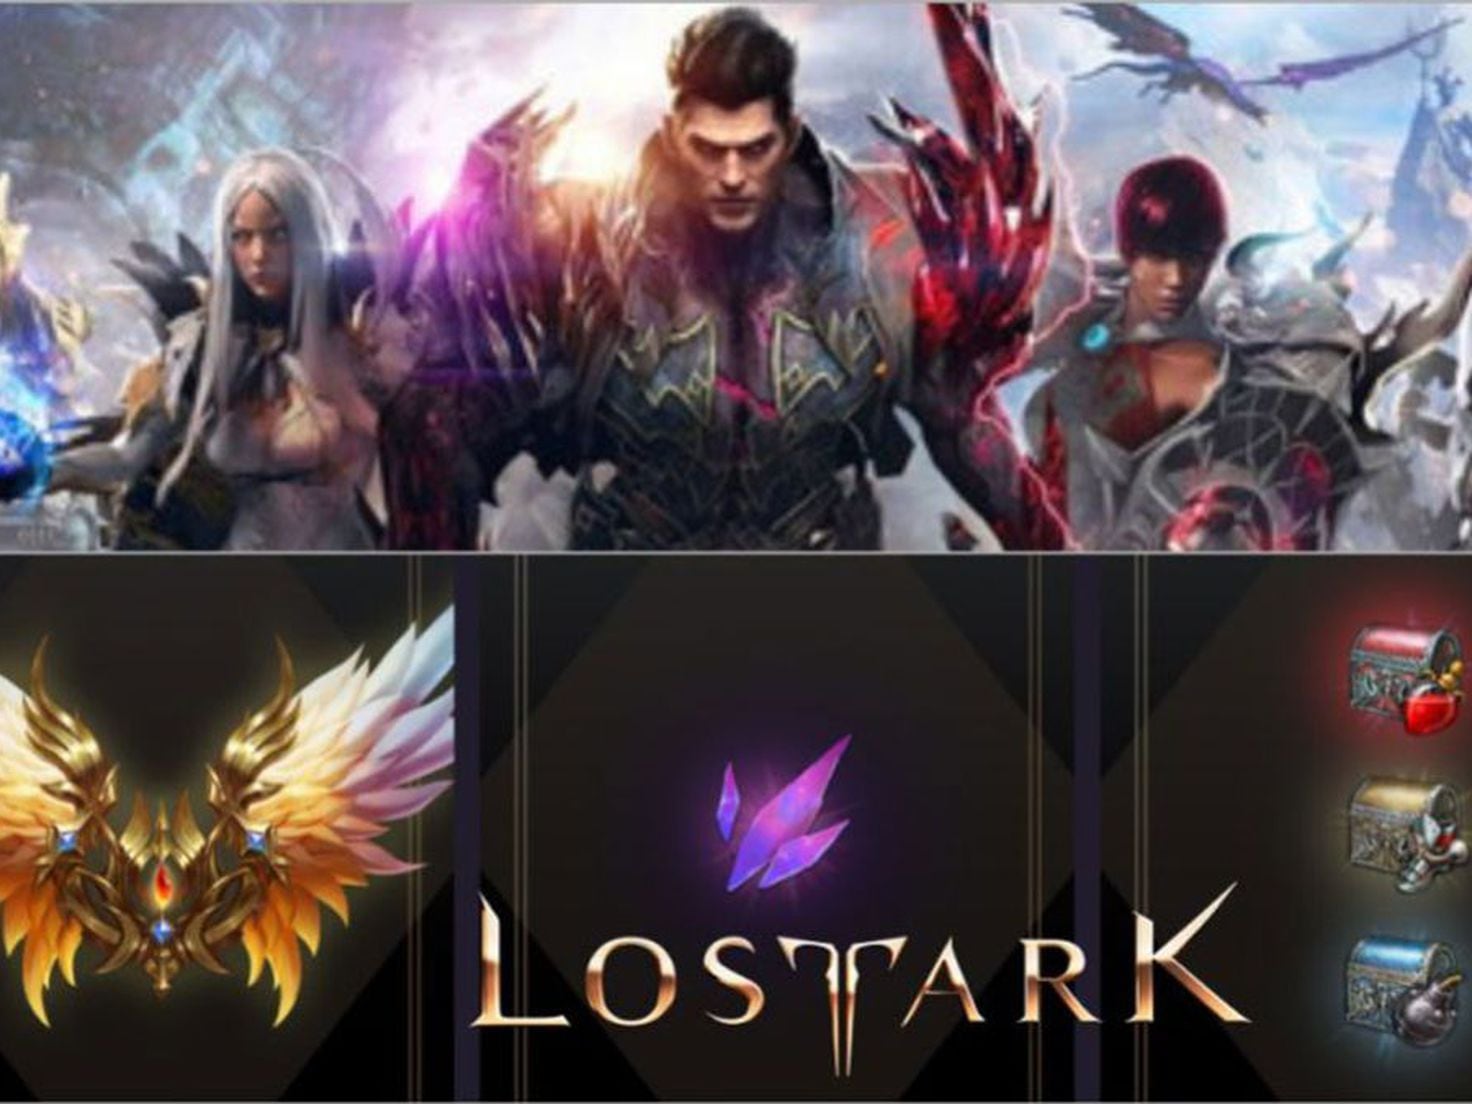 New Prime Gaming Loot - News  Lost Ark - Free to Play MMO Action RPG